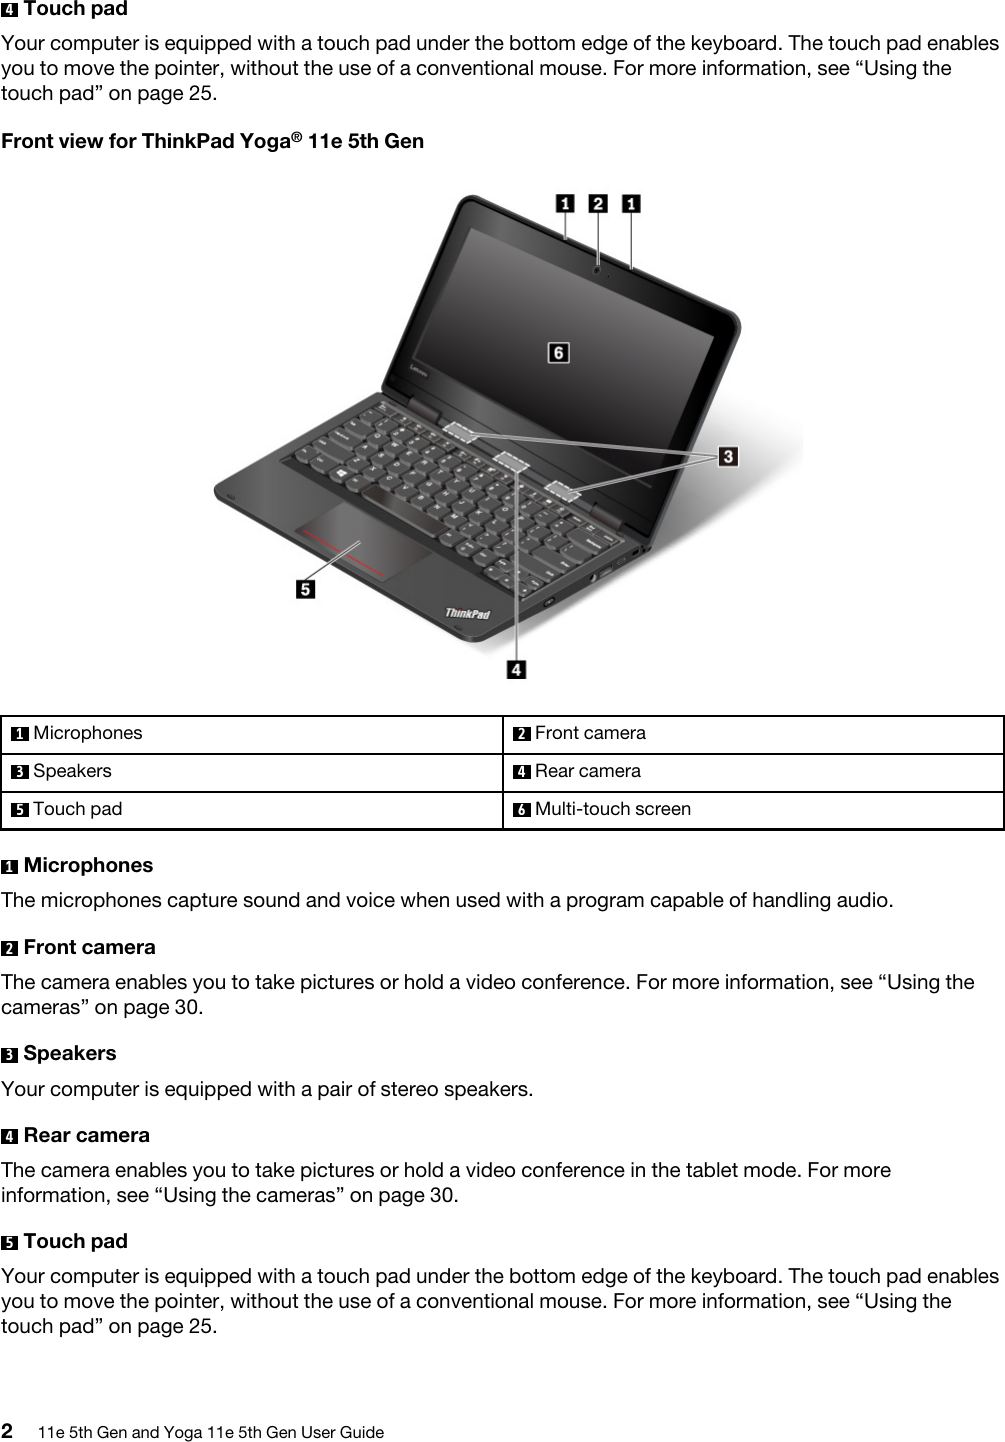 4  Touch padYour computer is equipped with a touch pad under the bottom edge of the keyboard. The touch pad enables you to move the pointer, without the use of a conventional mouse. For more information, see “Using the touch pad” on page 25.Front view for ThinkPad Yoga® 11e 5th Gen1  Microphones 2  Front camera3  Speakers 4  Rear camera5  Touch pad 6  Multi-touch screen1  MicrophonesThe microphones capture sound and voice when used with a program capable of handling audio.2  Front cameraThe camera enables you to take pictures or hold a video conference. For more information, see “Using the cameras” on page 30.3  SpeakersYour computer is equipped with a pair of stereo speakers.4  Rear cameraThe camera enables you to take pictures or hold a video conference in the tablet mode. For more information, see “Using the cameras” on page 30.5  Touch padYour computer is equipped with a touch pad under the bottom edge of the keyboard. The touch pad enables you to move the pointer, without the use of a conventional mouse. For more information, see “Using the touch pad” on page 25.211e 5th Gen and Yoga 11e 5th Gen User Guide